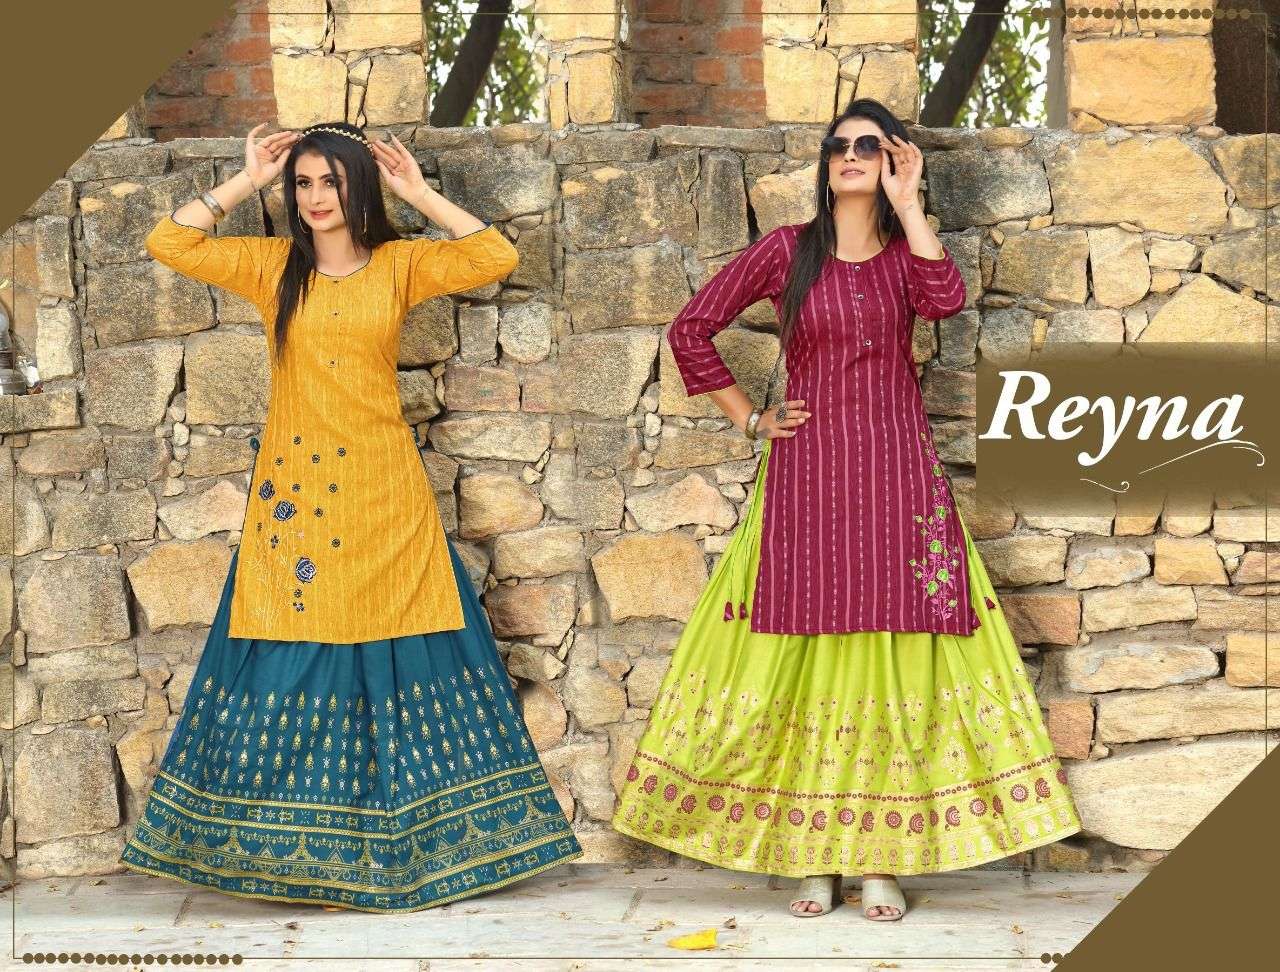 Beauty queen Reyna TOP Heavy Rayon Self Embosse 17Kg ,  SKIRT Rayon 17Kg Pattarn - Top Embroidered , Skirt Foil Print ,  CATALOG WHOLESALER BEST RATE